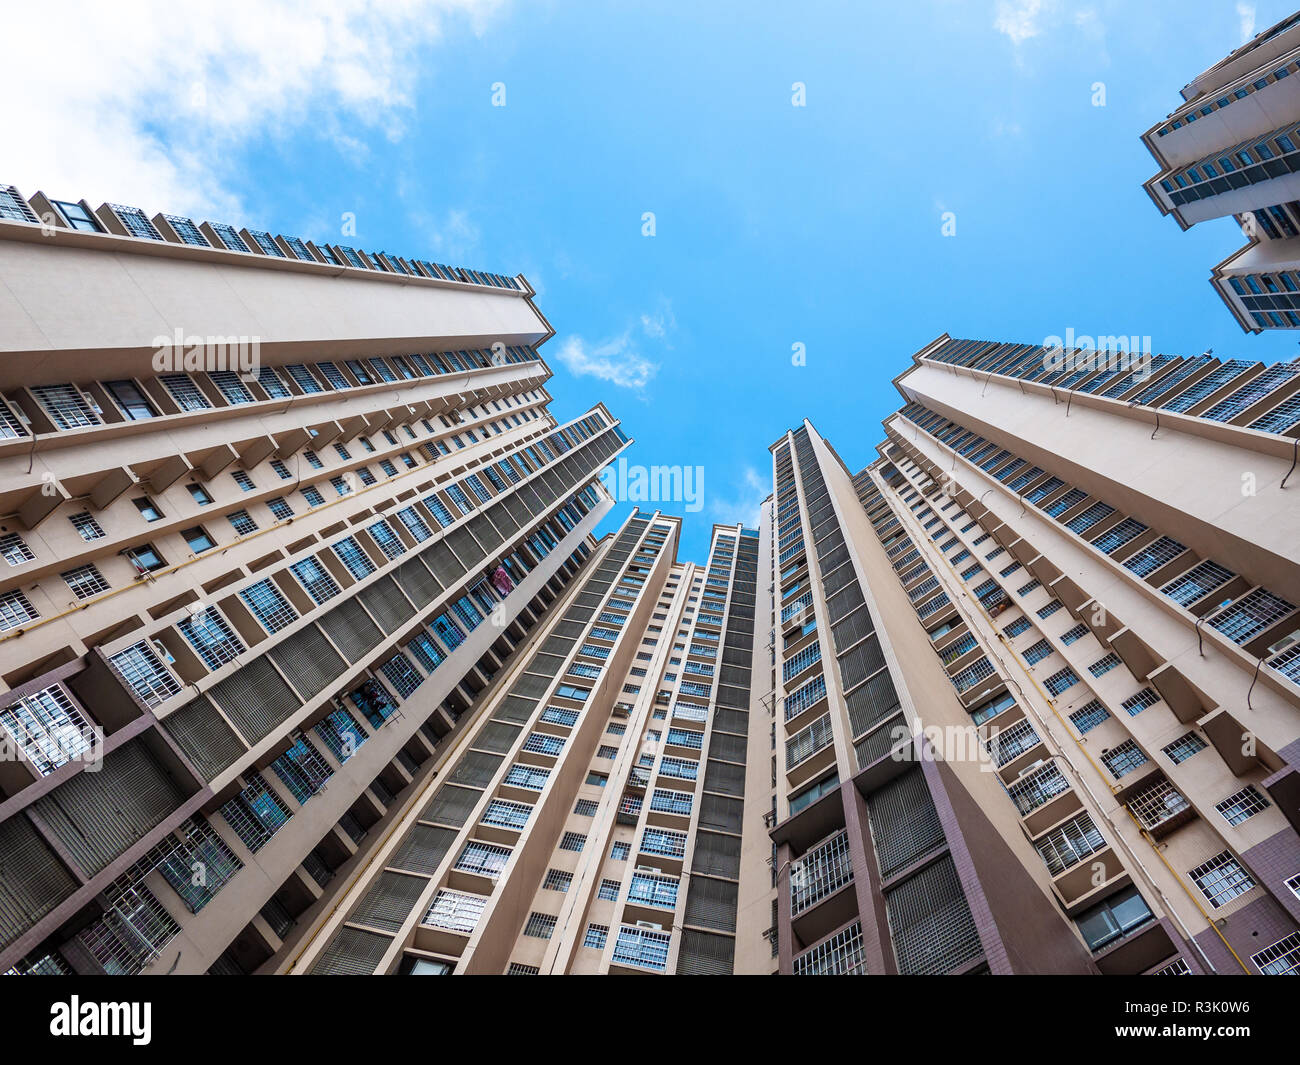 Looking up from bottom of high-rise residential apartment buildings. Liuzhou, Guangxi Province, China. Stock Photo